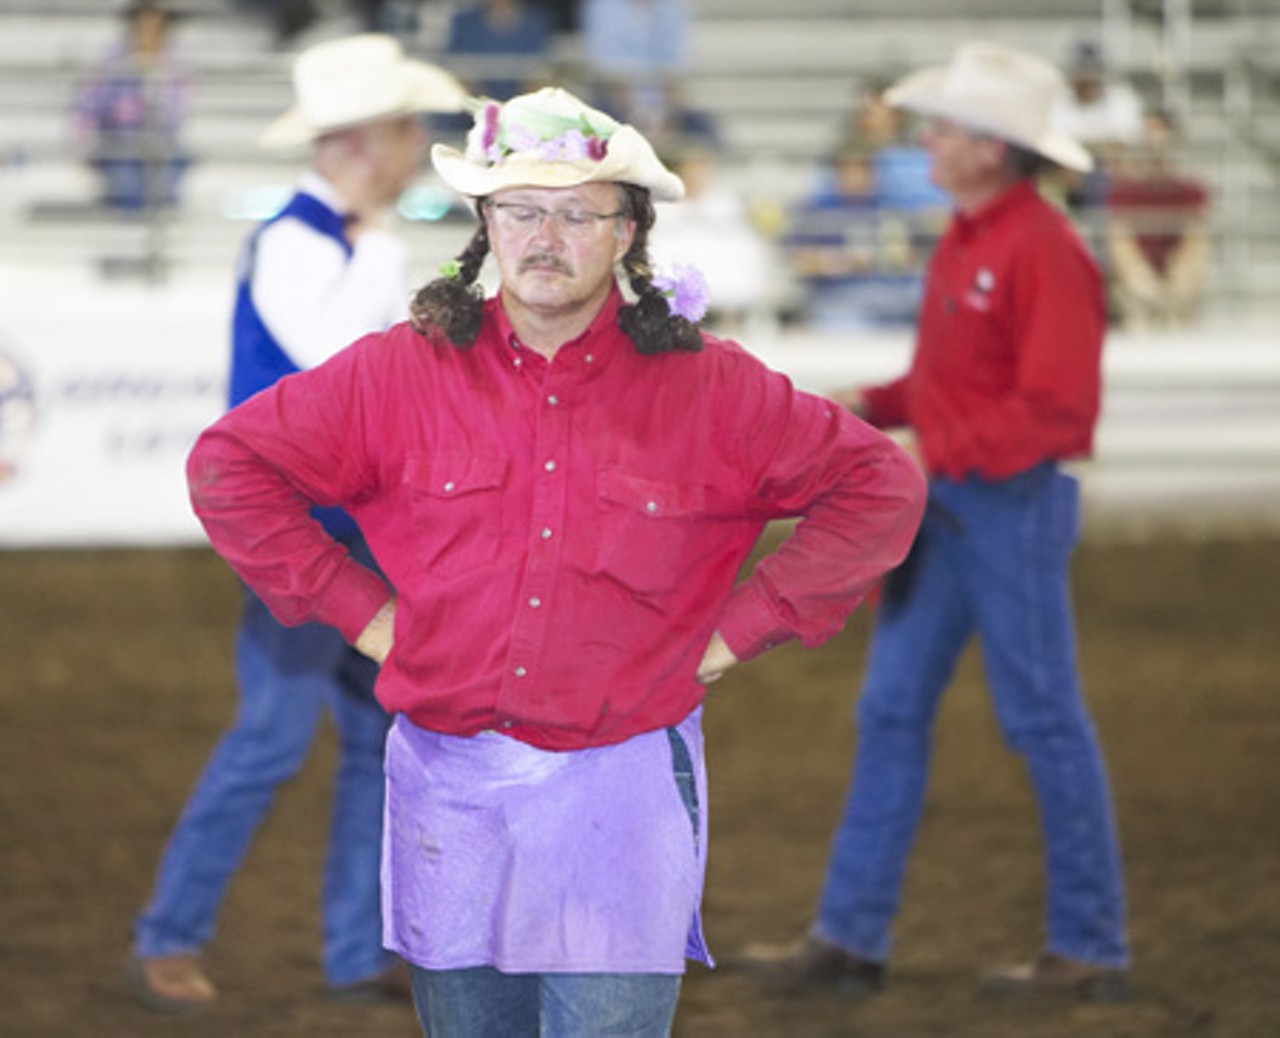 Sometimes, it's not all smiles and steers at the Gateway Gay Rodeo.